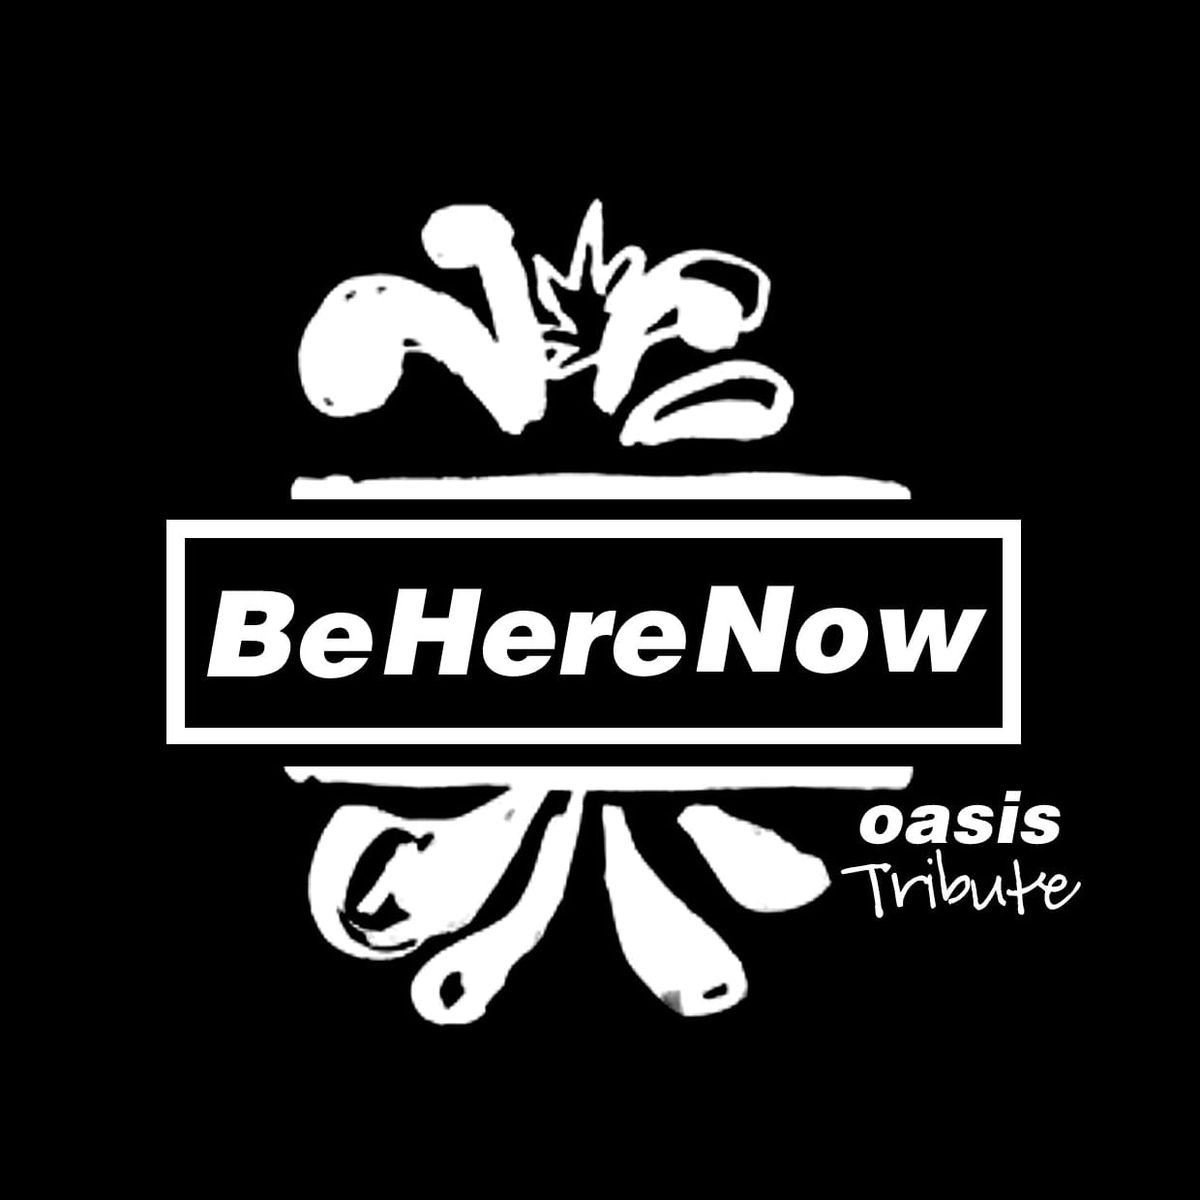 Be Here Now - Oasis Tribute UK at The King's Arms, Kingsteignton 